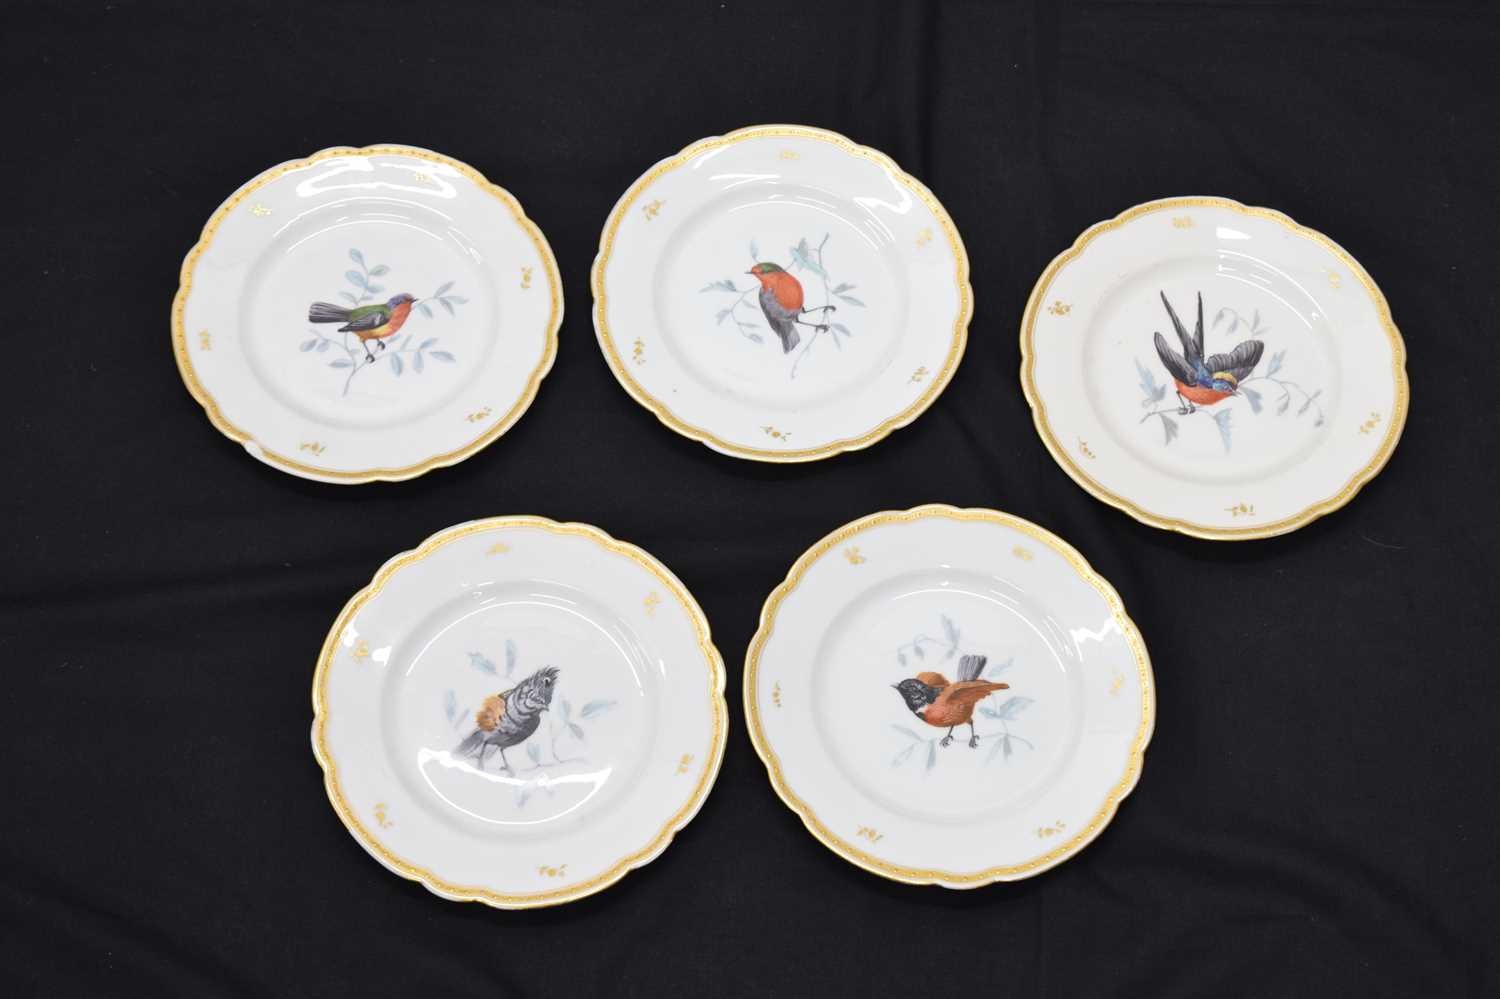 19th century Vienna porcelain dinner wares - Image 4 of 18